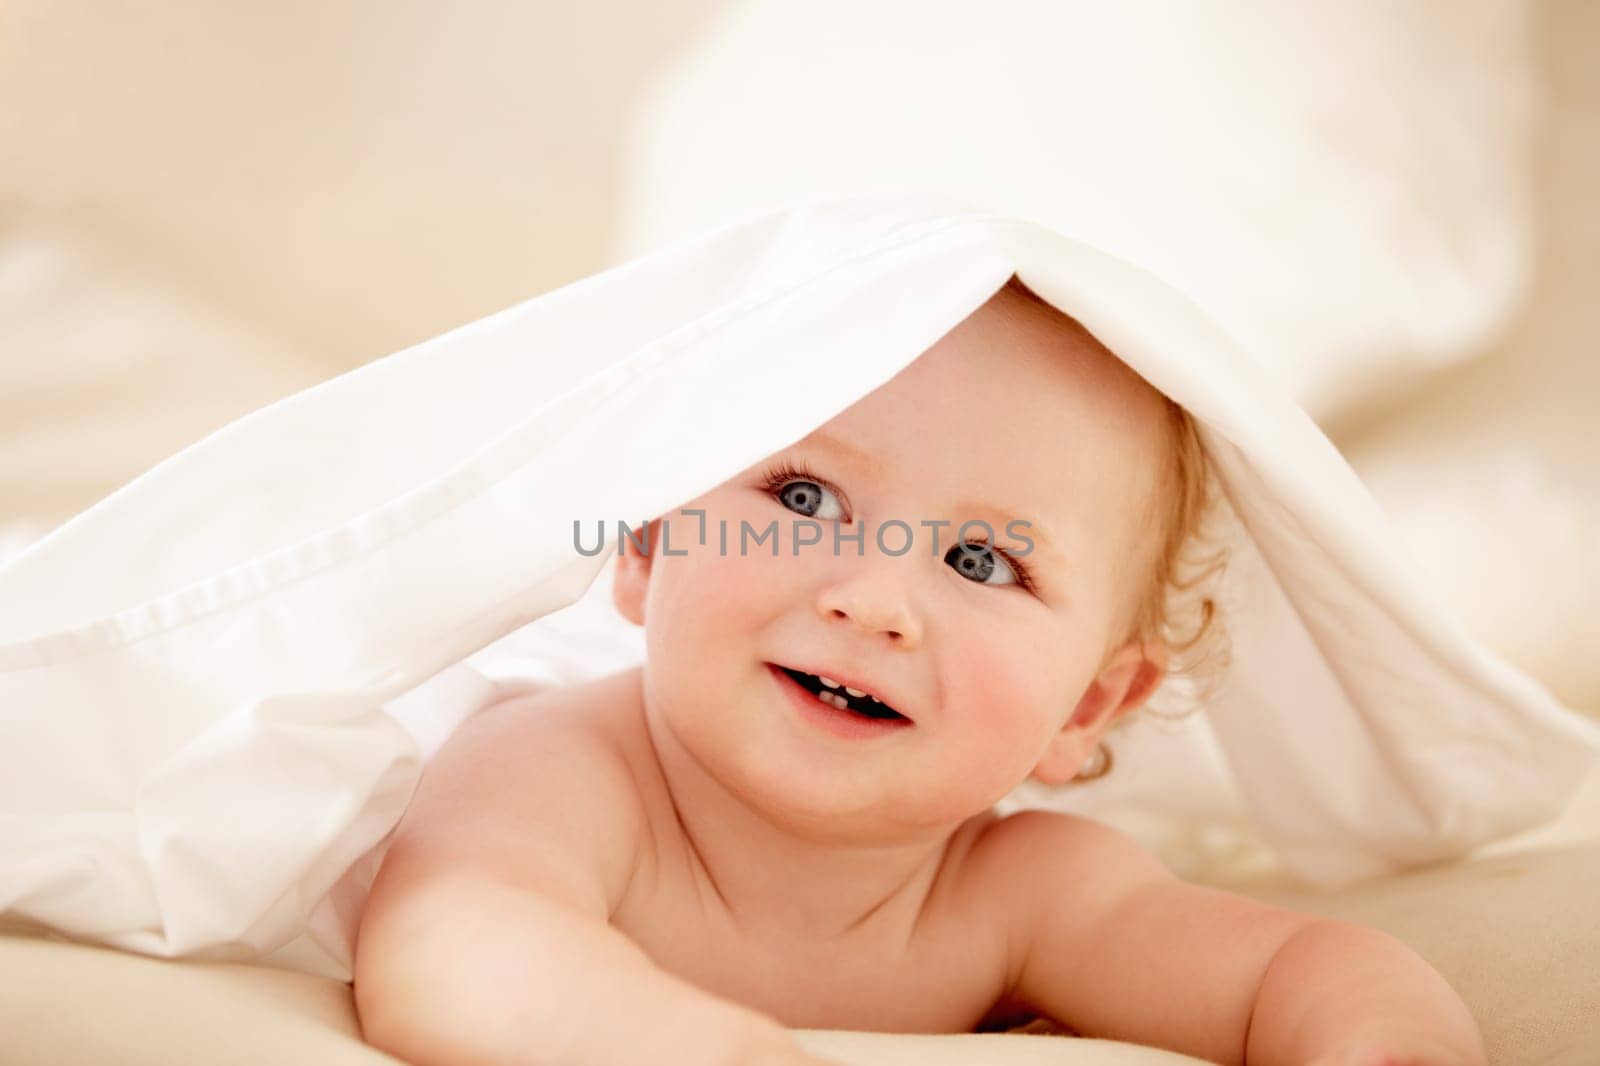 Smile, face and happy baby on a bed with blanket for playing, games or fun in a nursery room. Learning, child development and curious little boy kid in a bedroom with sheet cover while lying in house.